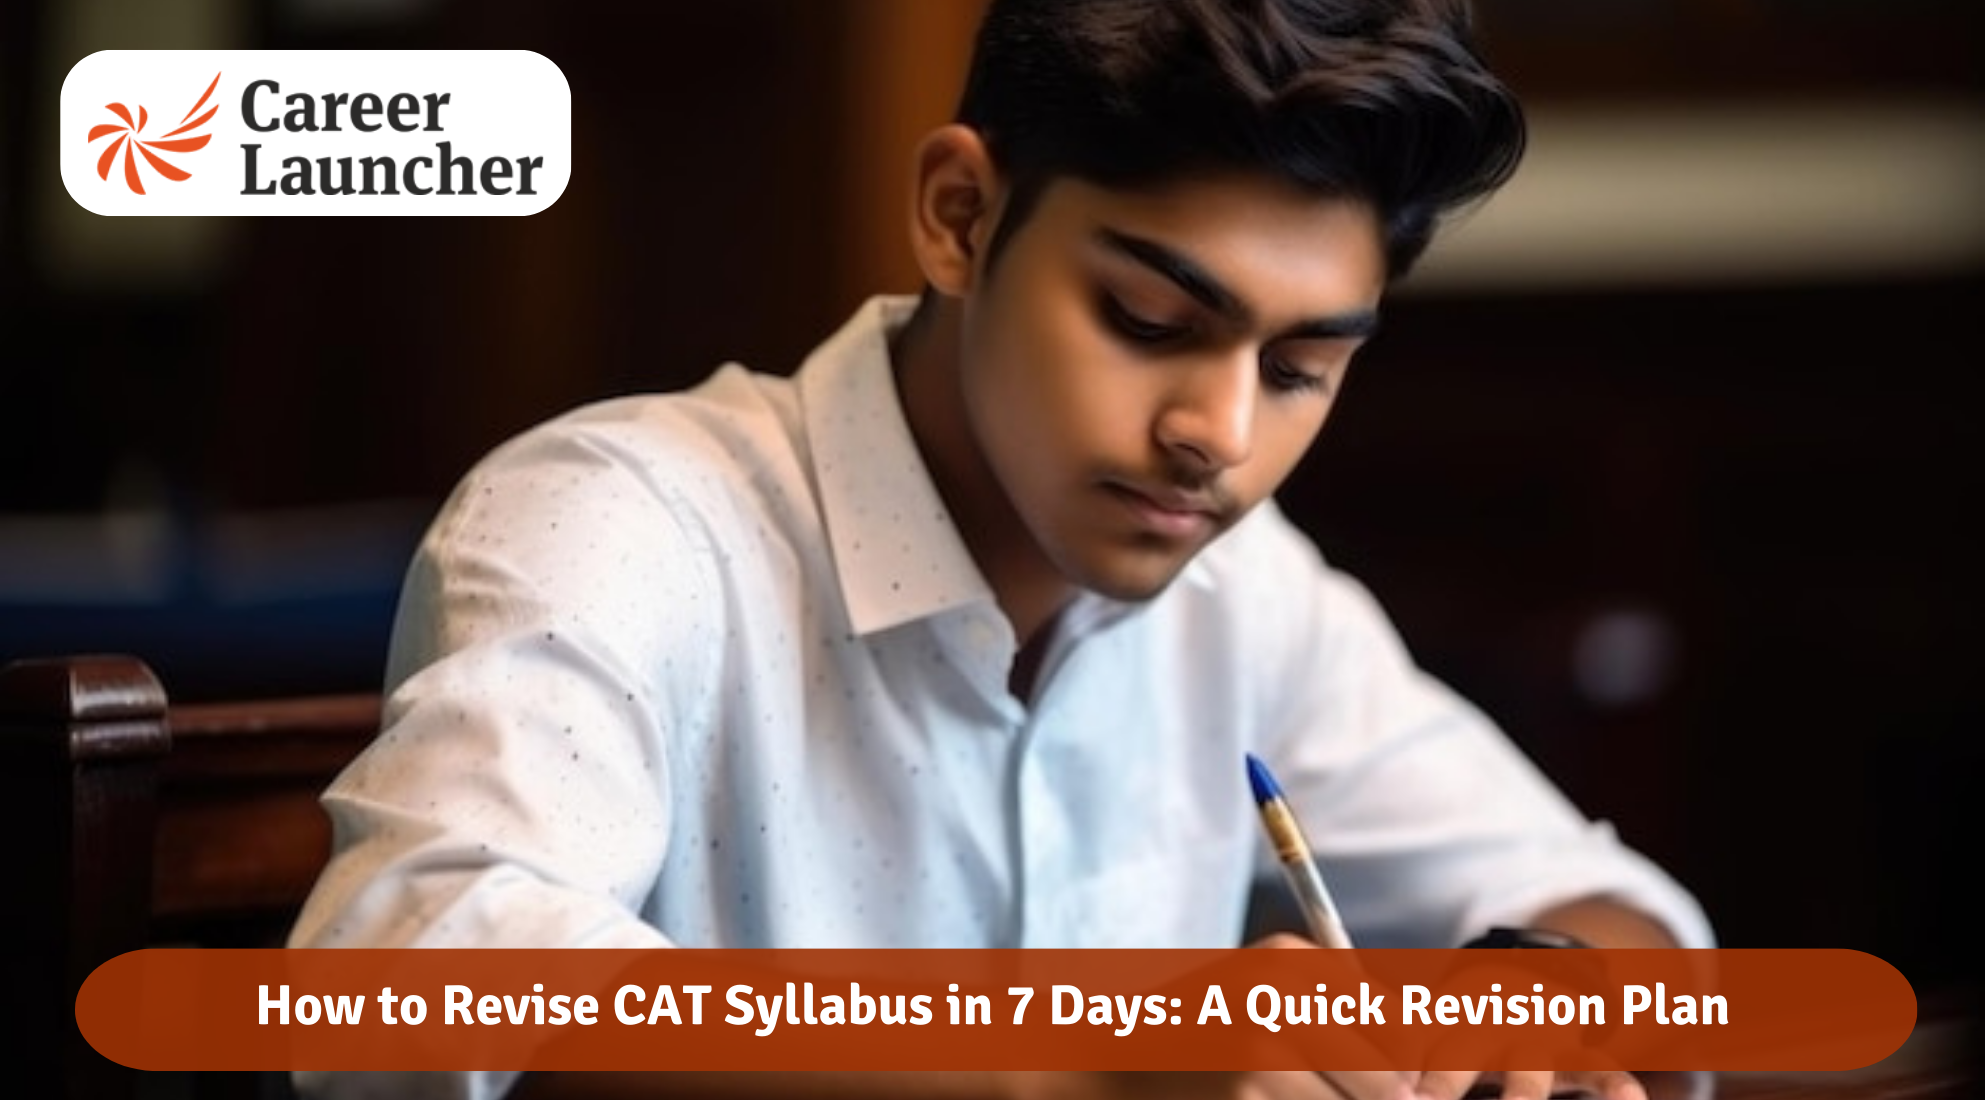 How to Revise CAT Syllabus in 7 Days: A Quick Revision Plan